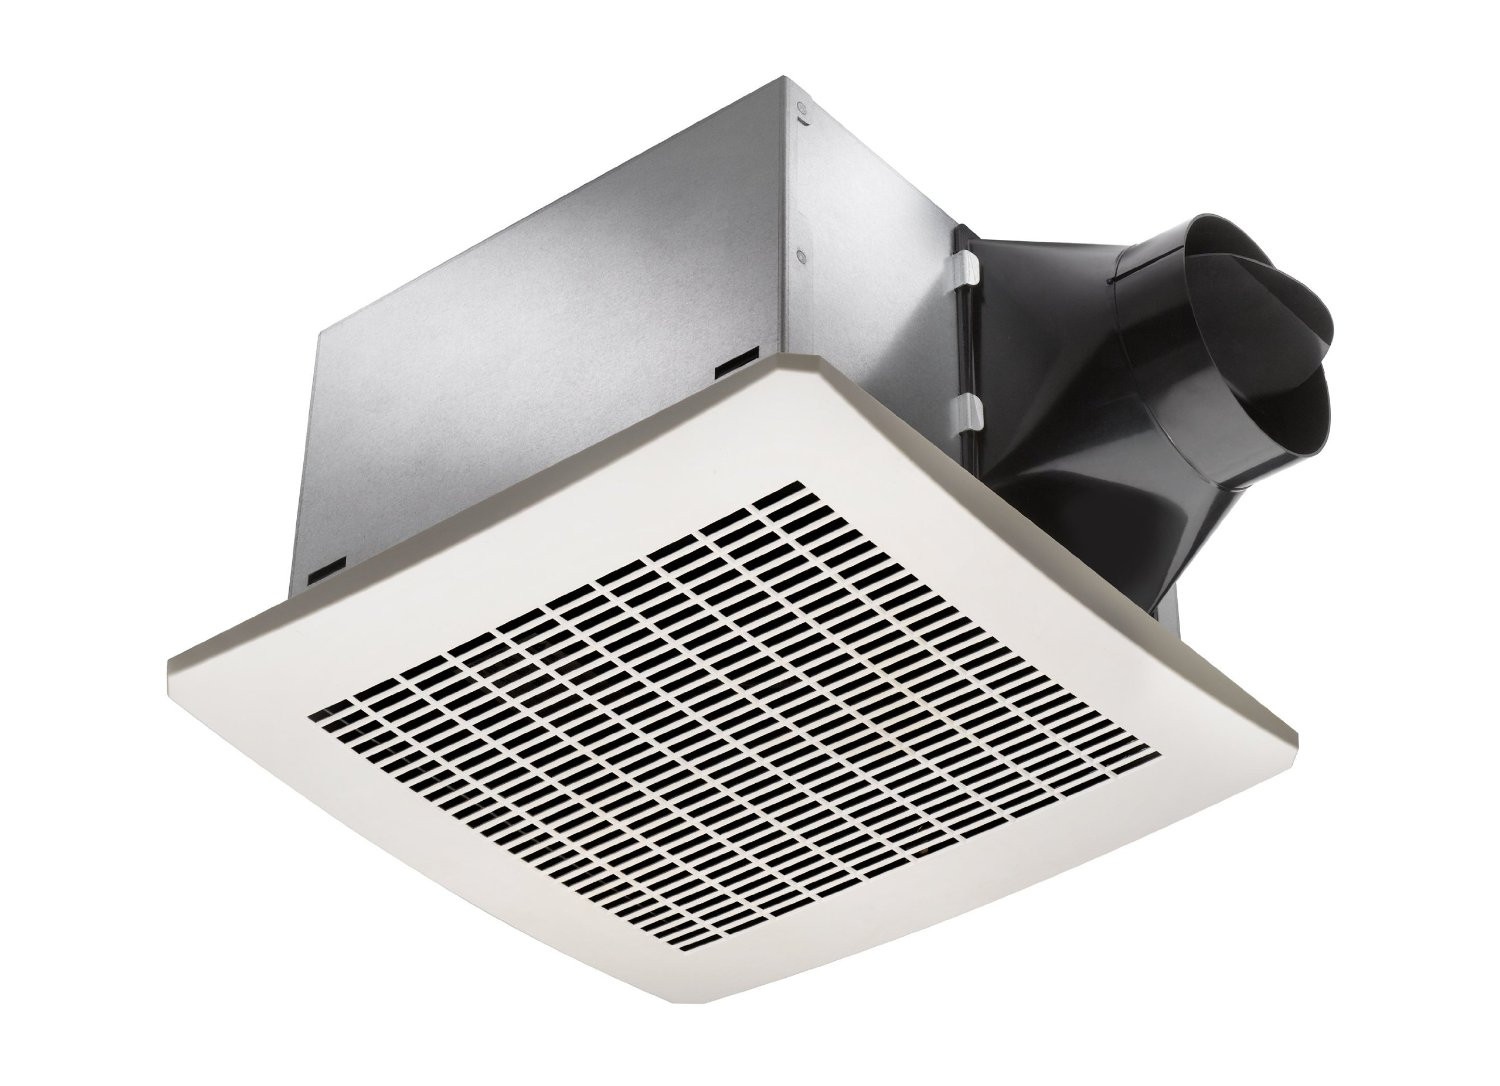 Top Rated Bathroom Exhaust Fans
 A Guide to Finding the Best Bathroom Fan A Great Shower